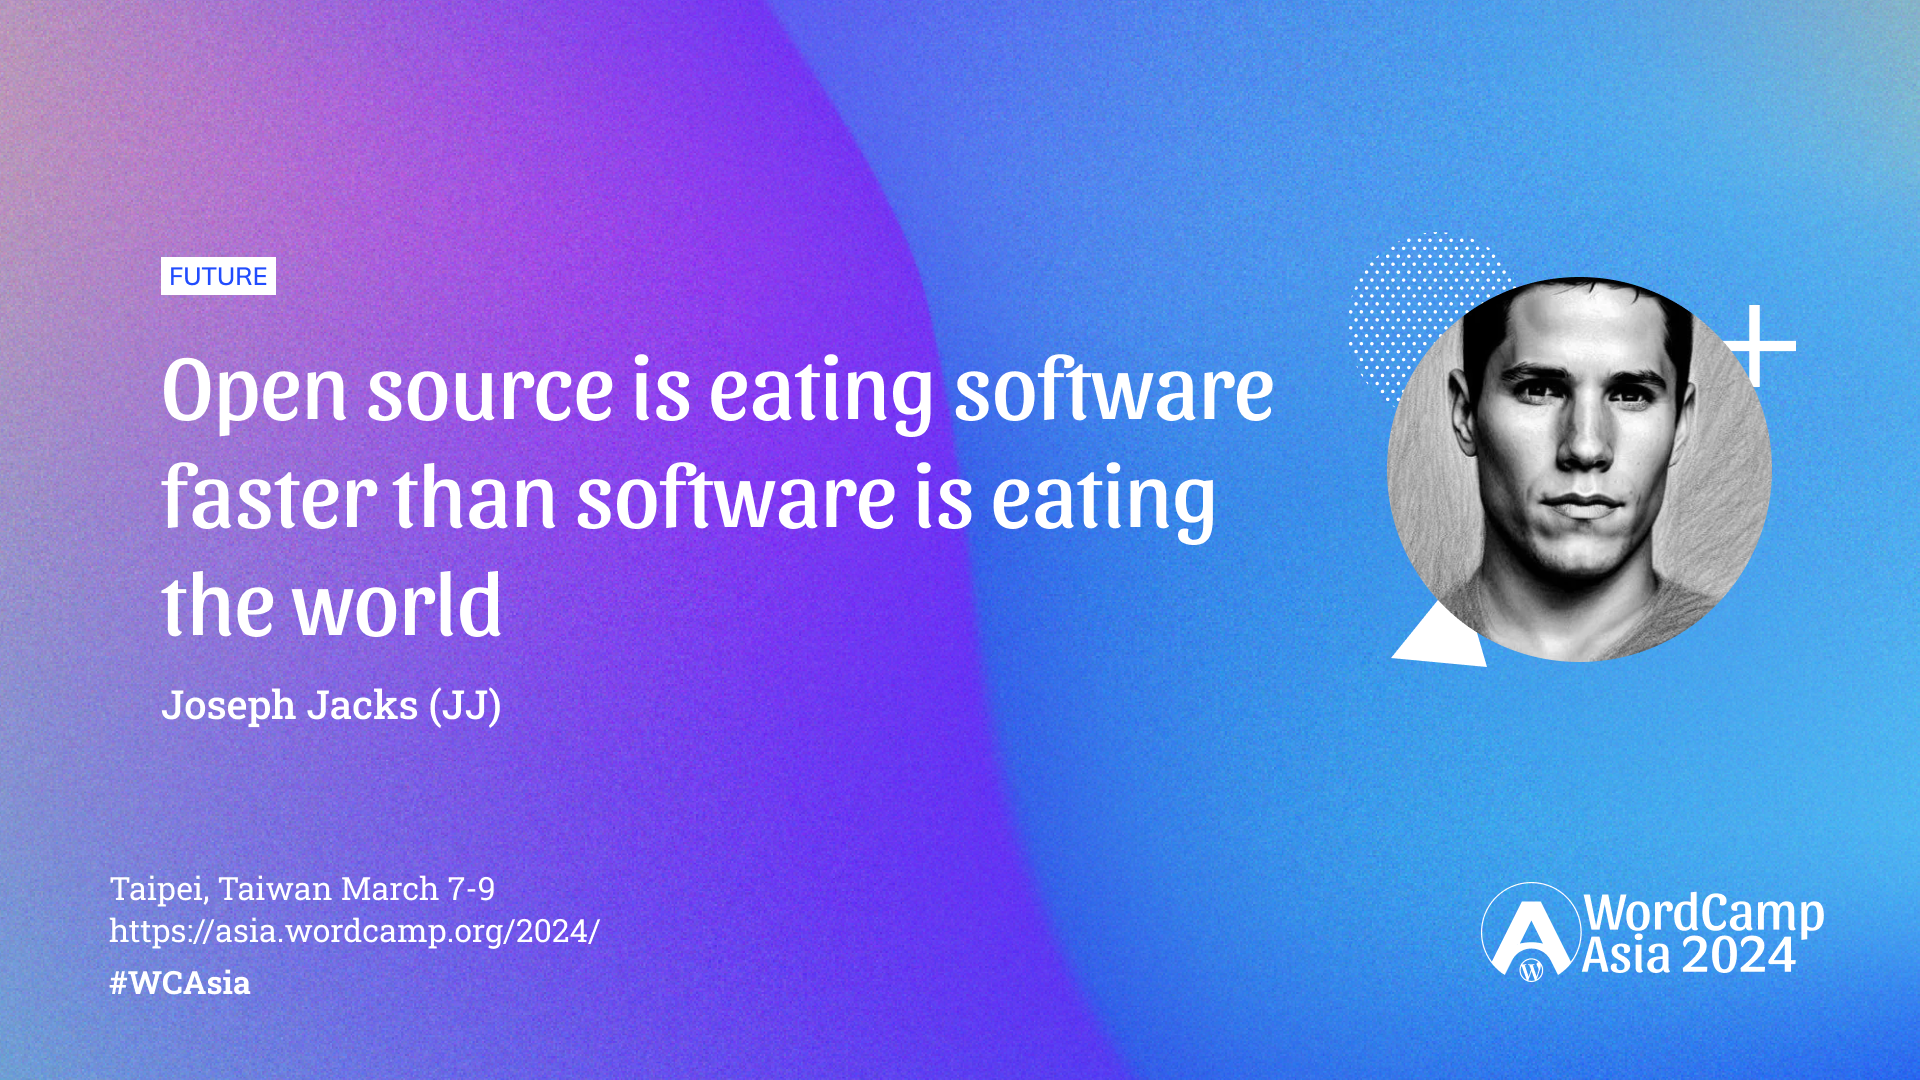 [Canceled] Open source is eating software faster than software is eating the world